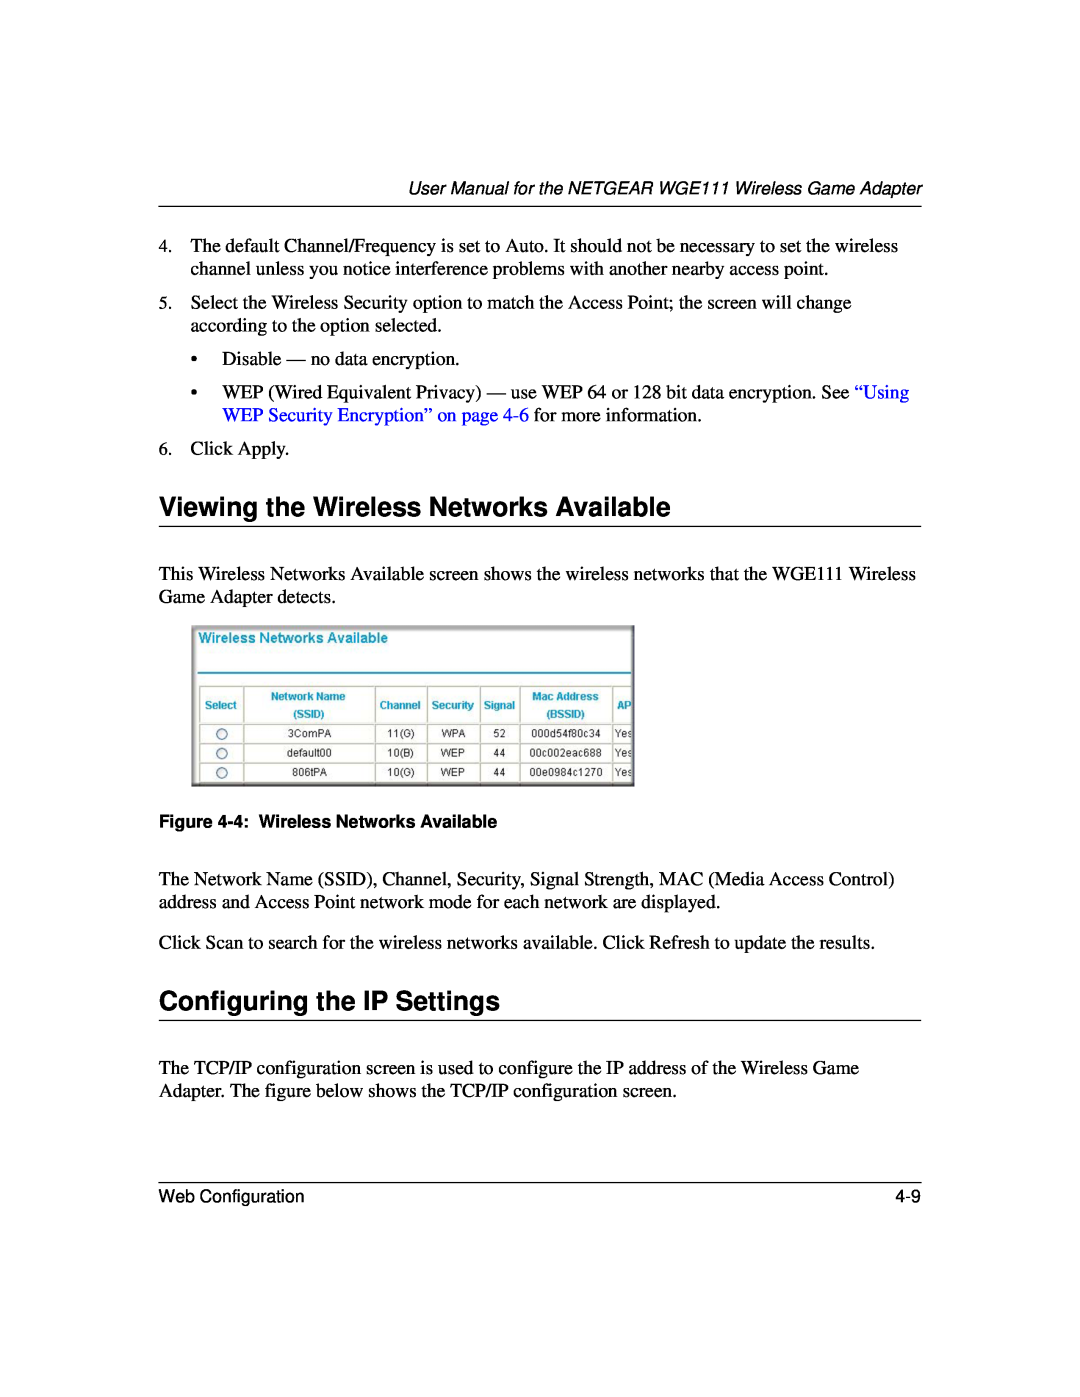 NETGEAR WGE111 Viewing the Wireless Networks Available, Configuring the IP Settings, 4 Wireless Networks Available 